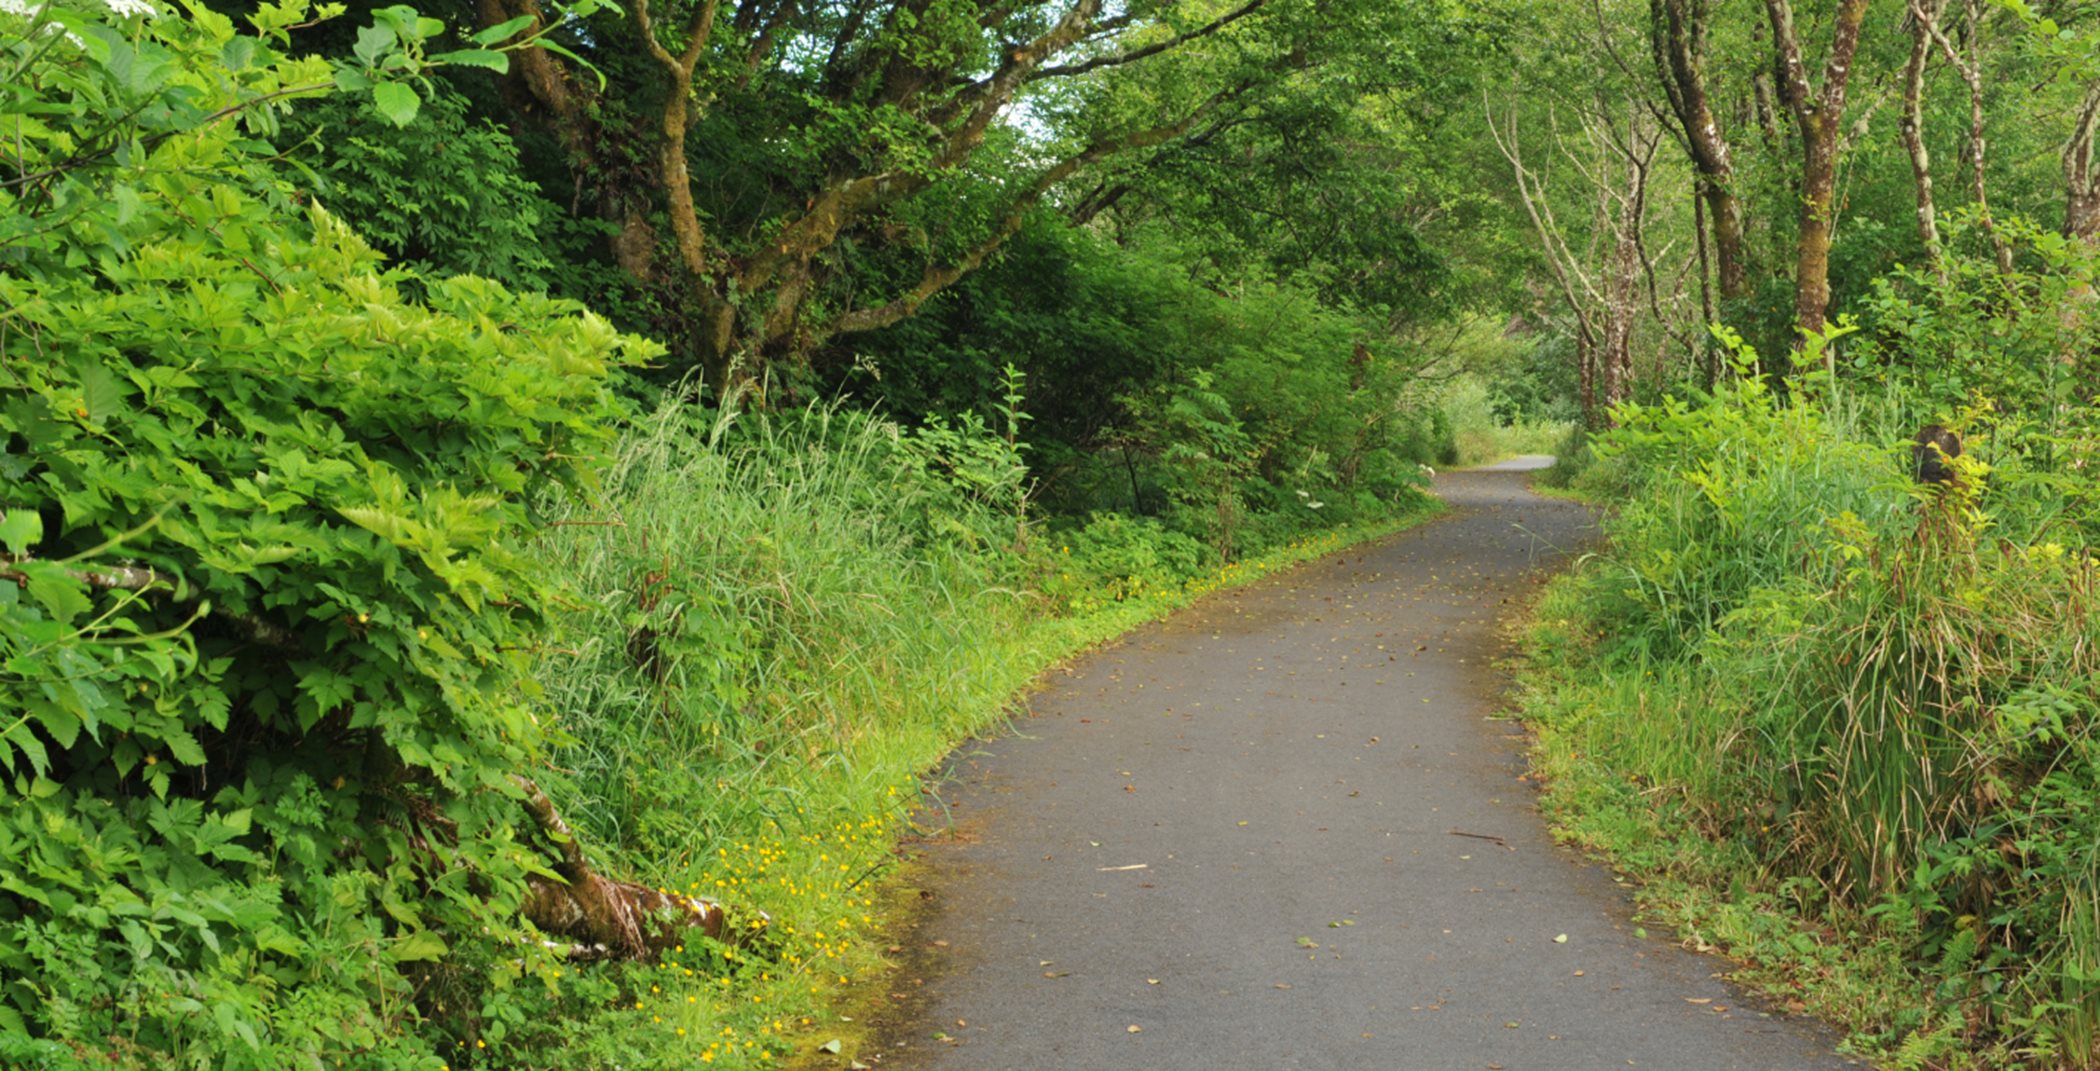 Machias Trail: a paved hiking trail surrounded by vibrant greenery